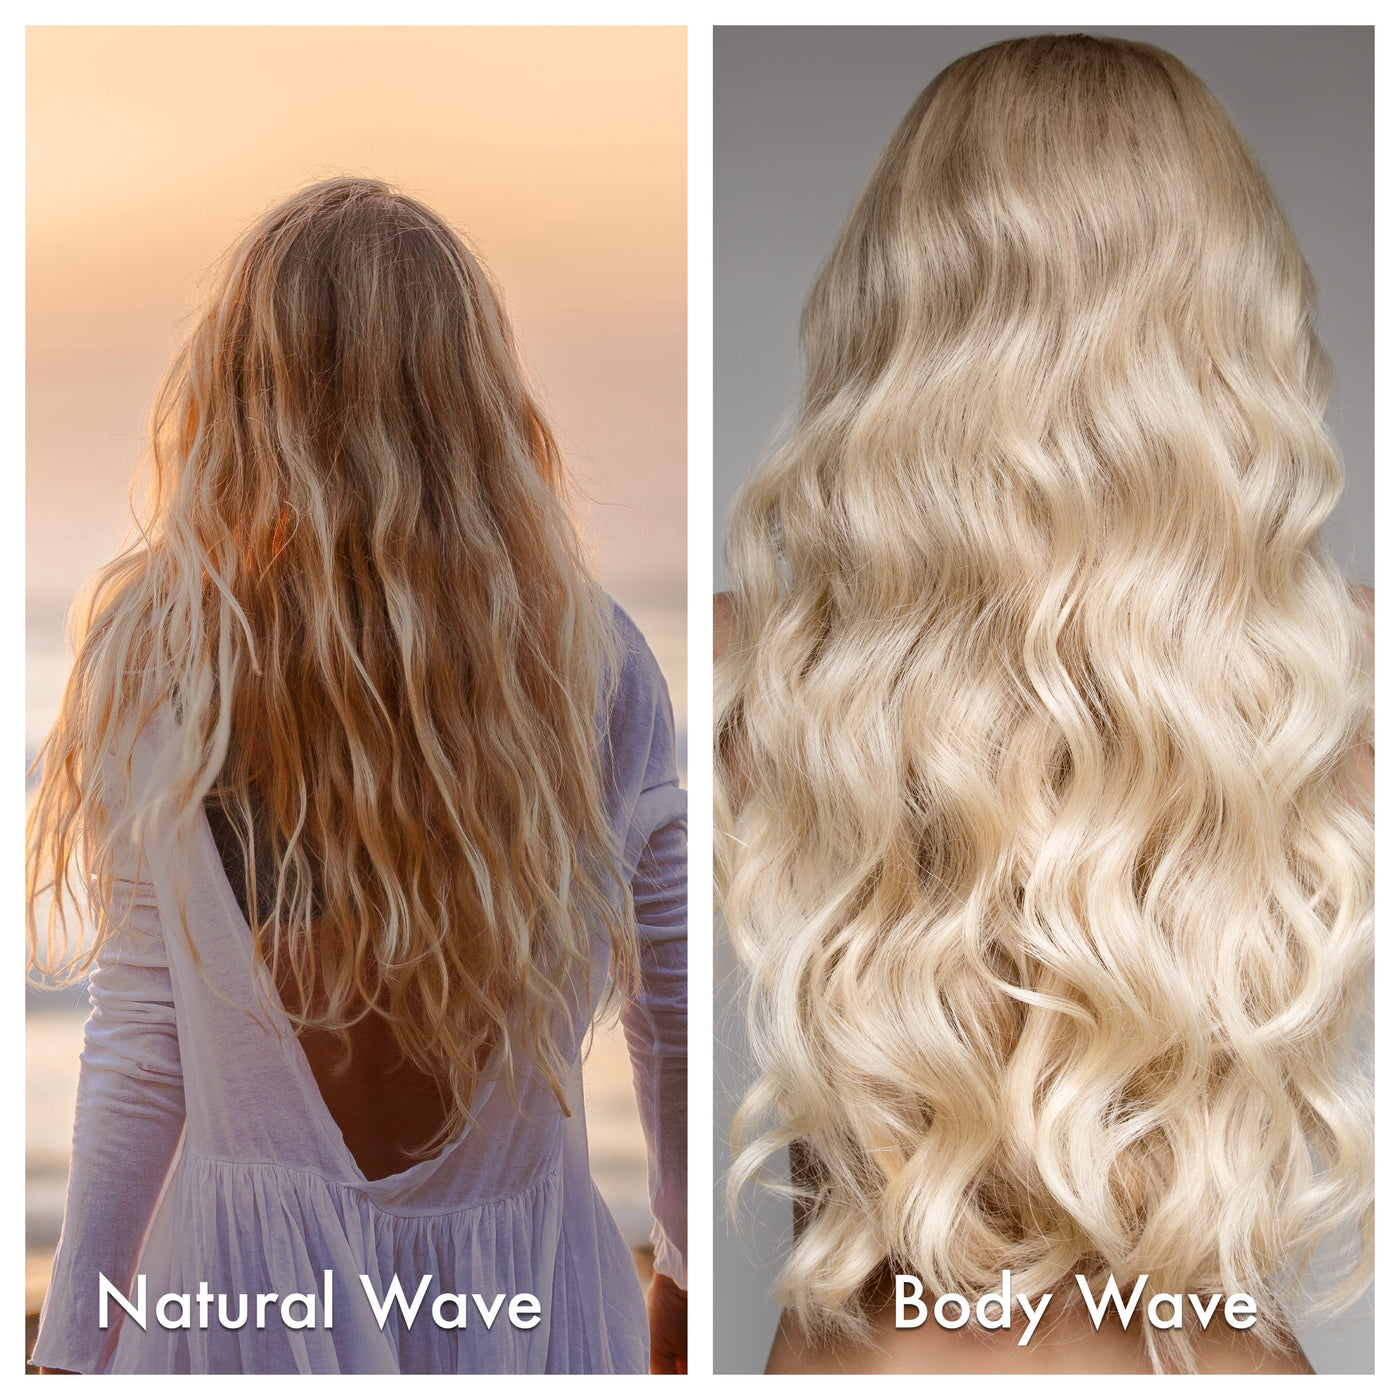 LUXE Wave Weft Hair Extensions | #8 - Sun Kissed